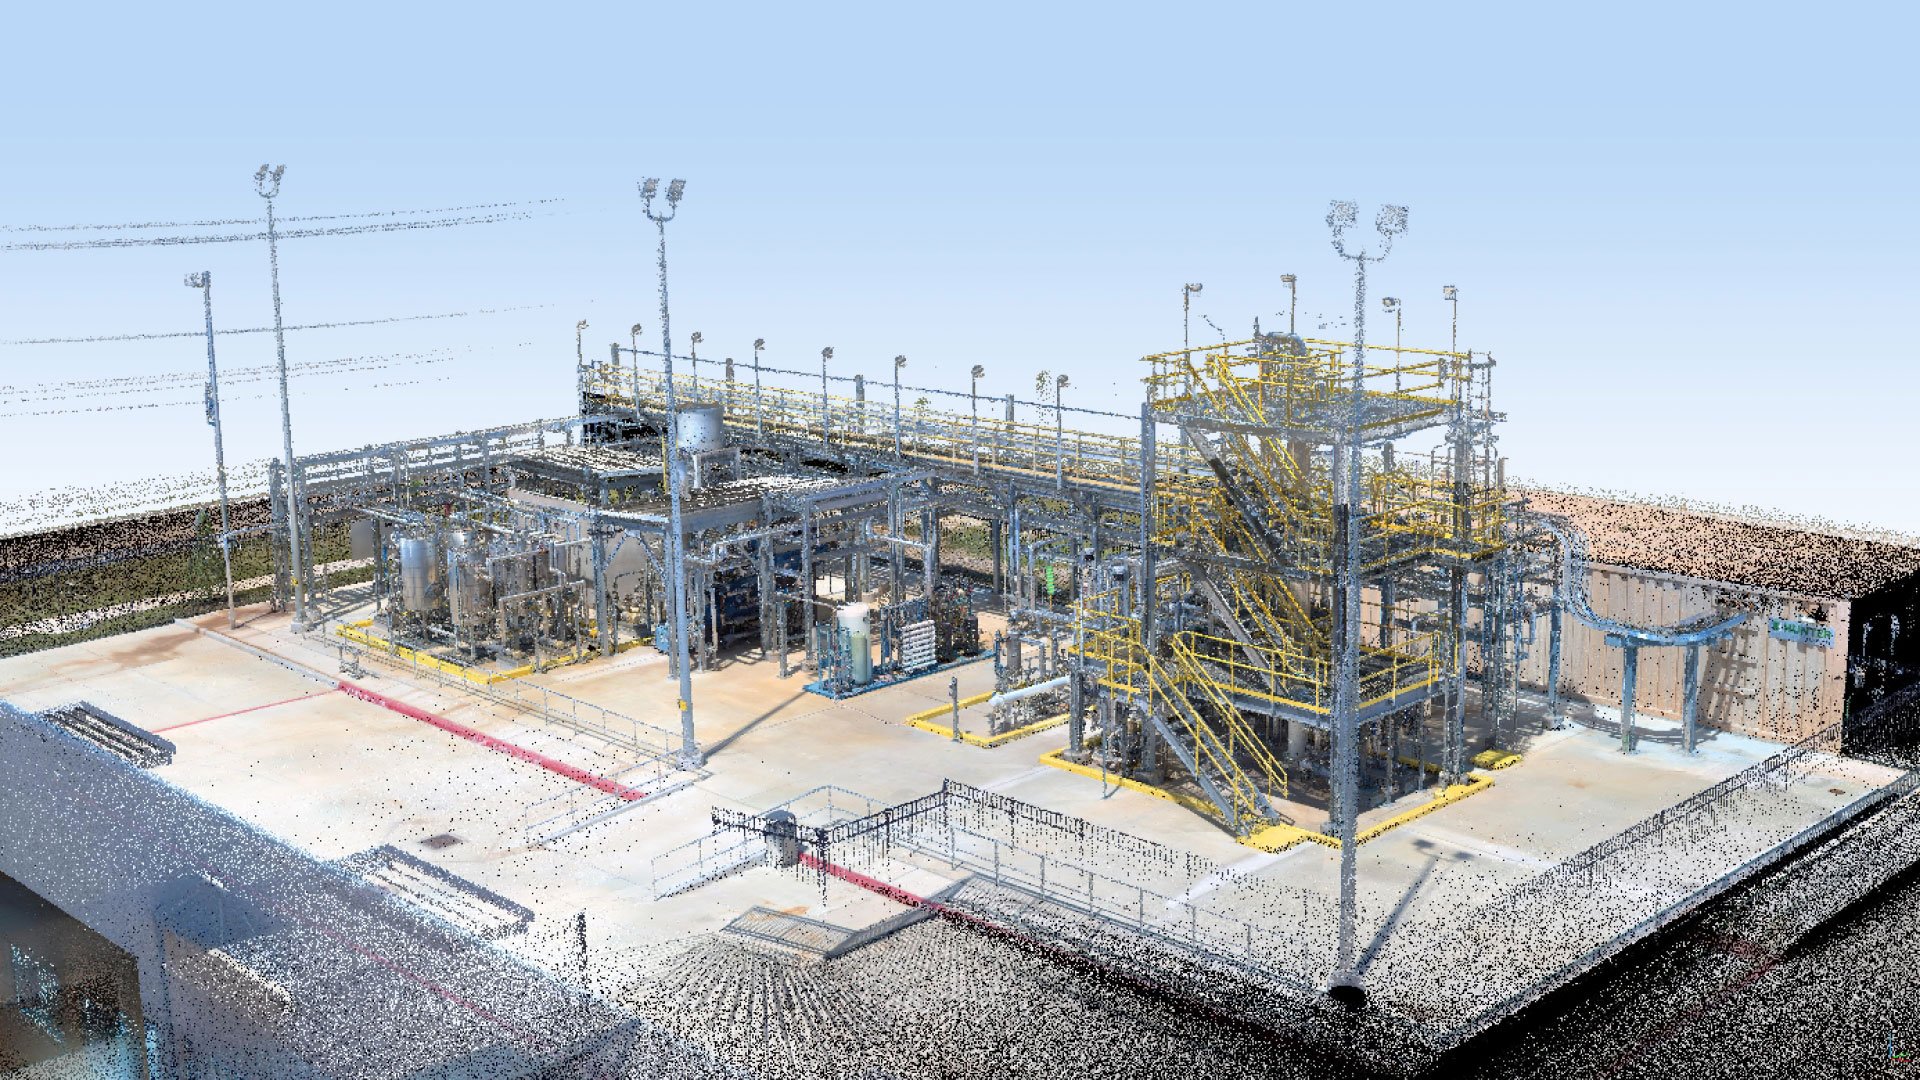 NavVis and AVEVA partner to advance laser scanning and energize the Digital Twin